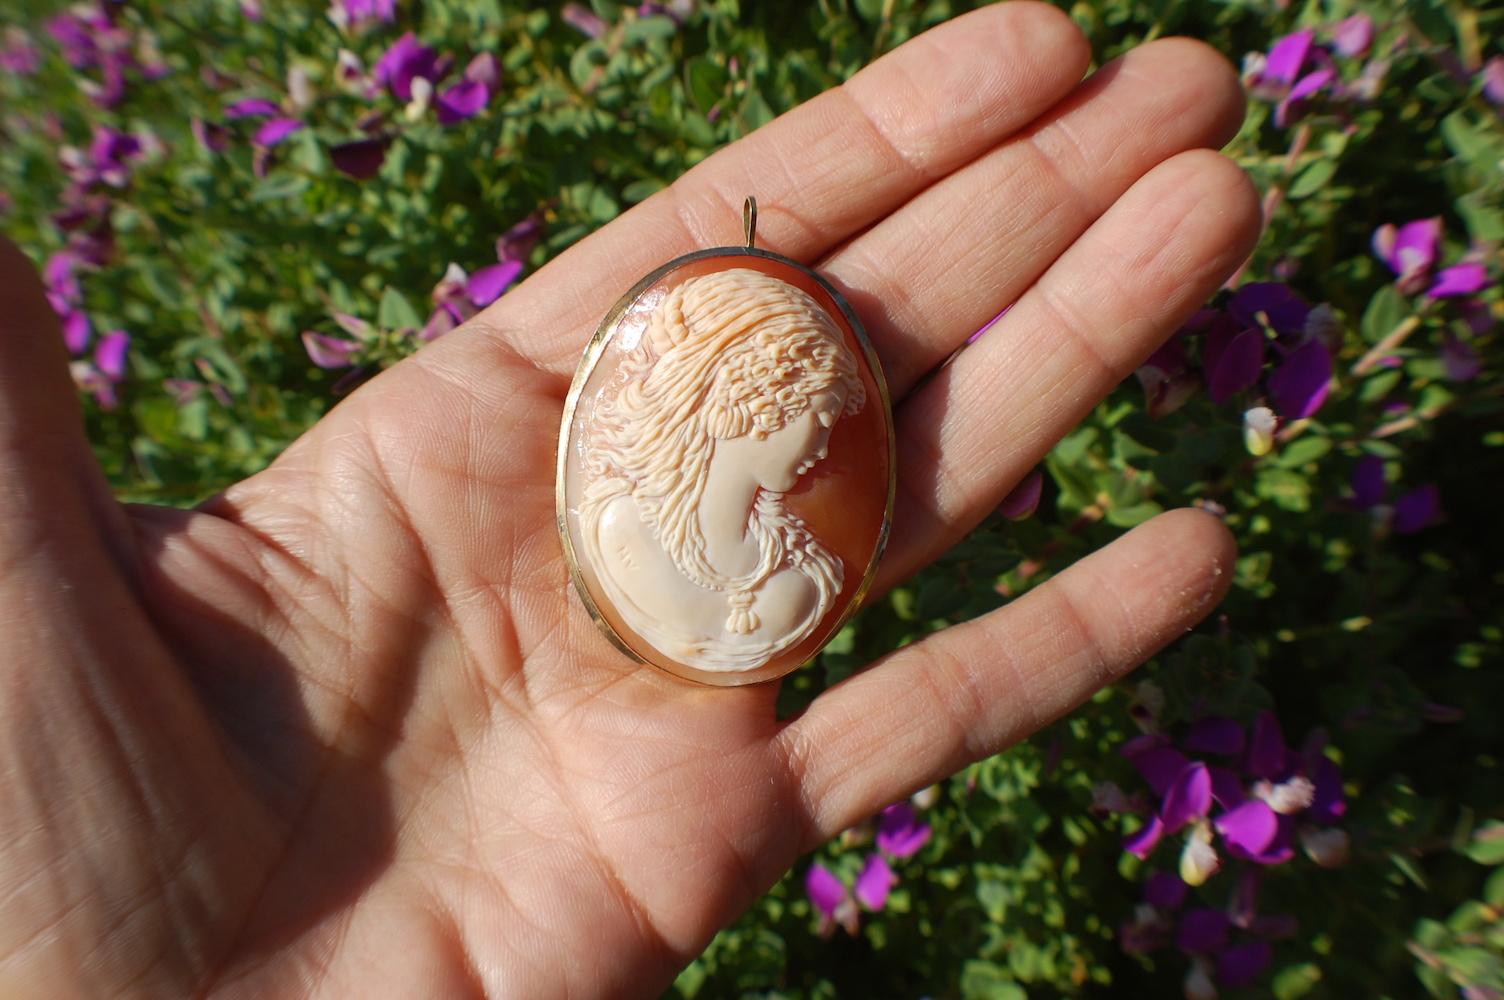 Beautiful Cameo made of natural tortoise captures the lovely ladies sincere beauty.
The pendant is 2